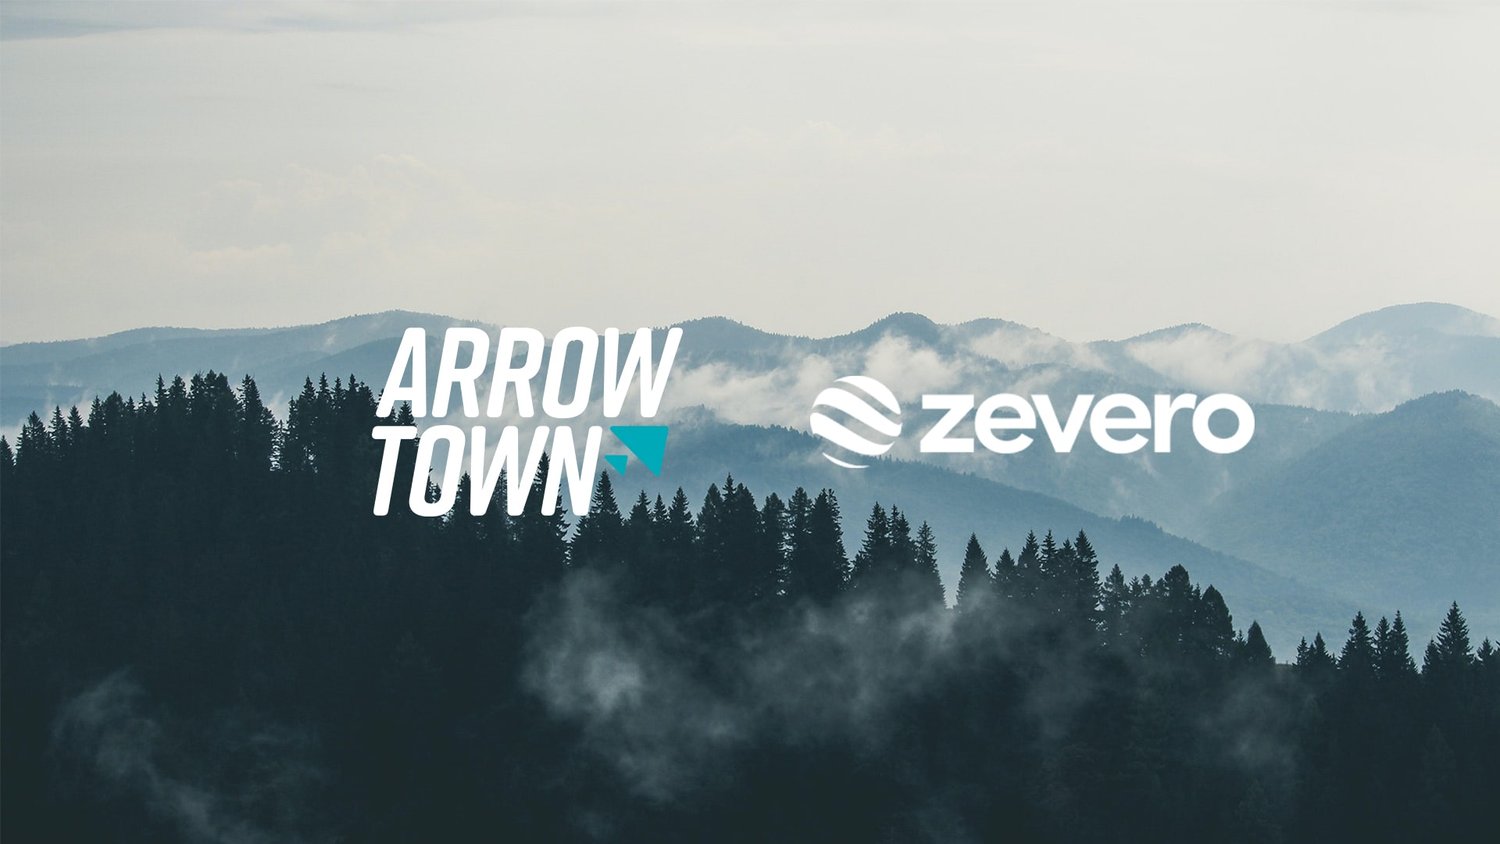 Arrowtown Drinks and Zevero logos on top of a forest.